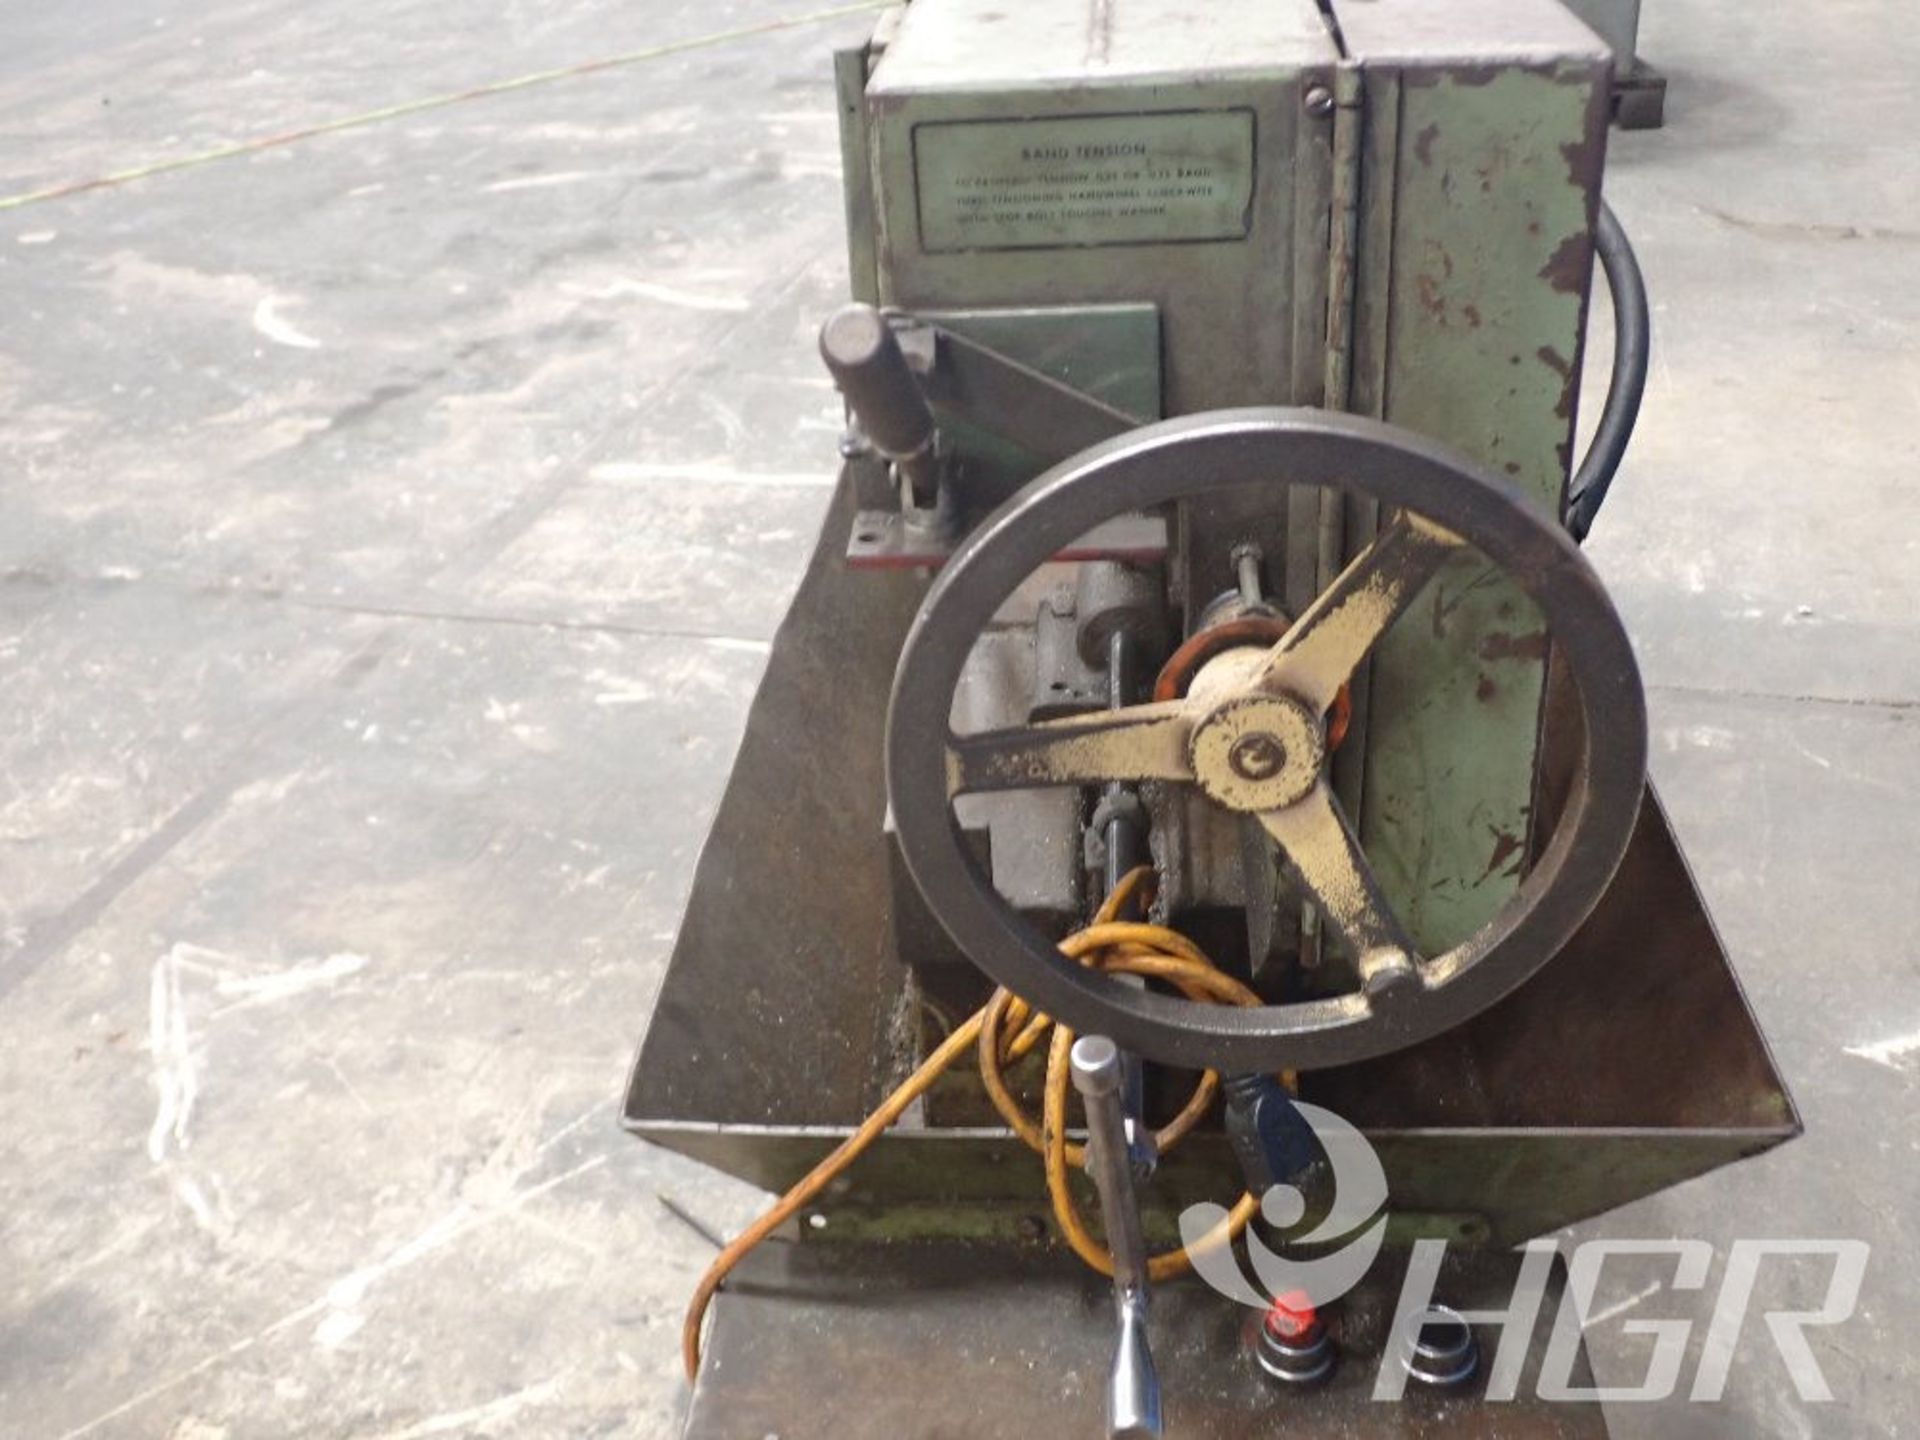 DO ALL HORIZONTAL BANDSAW, Model C-4, Date: n/a; s/n 234-773309, Approx. Capacity: 18", Power: 3/ - Image 9 of 19